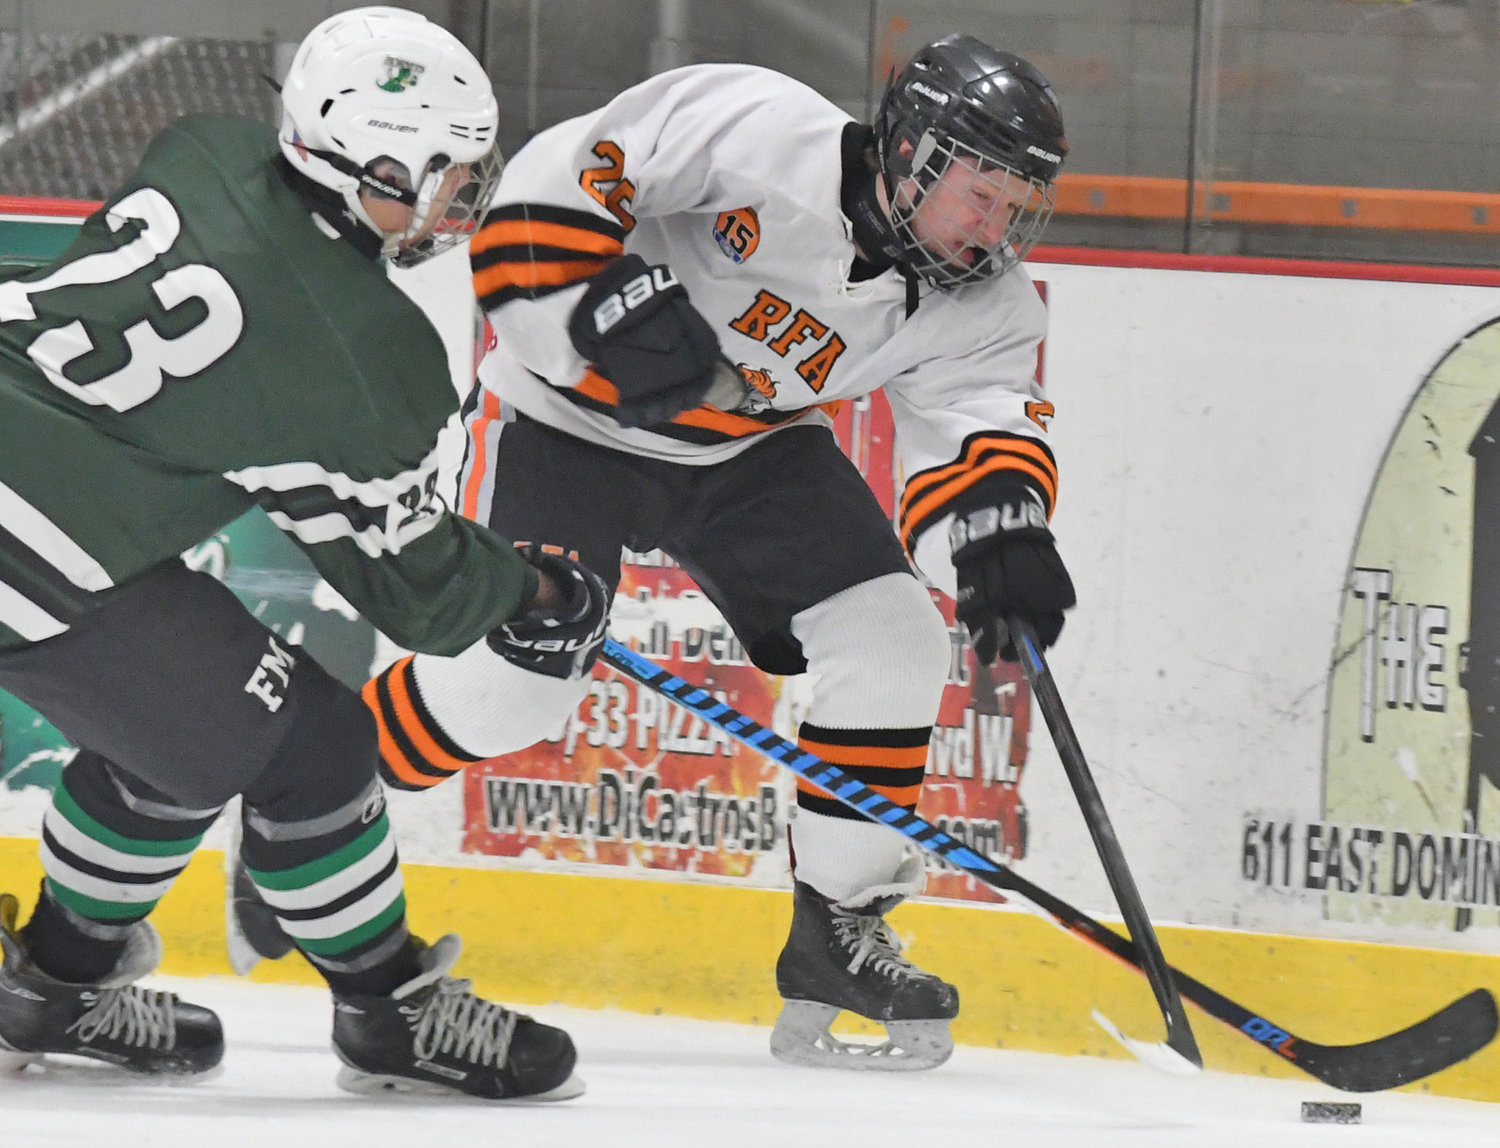 GET POSSESSION — Eli Dormio of Rome Free Academy, right, and Fayetteville-Manlius’ Jason Tedeschi go after the puck on Tuesday night at Kennedy Arena. F-M won 2-1, ending Rome’s nine-game home winning streak.